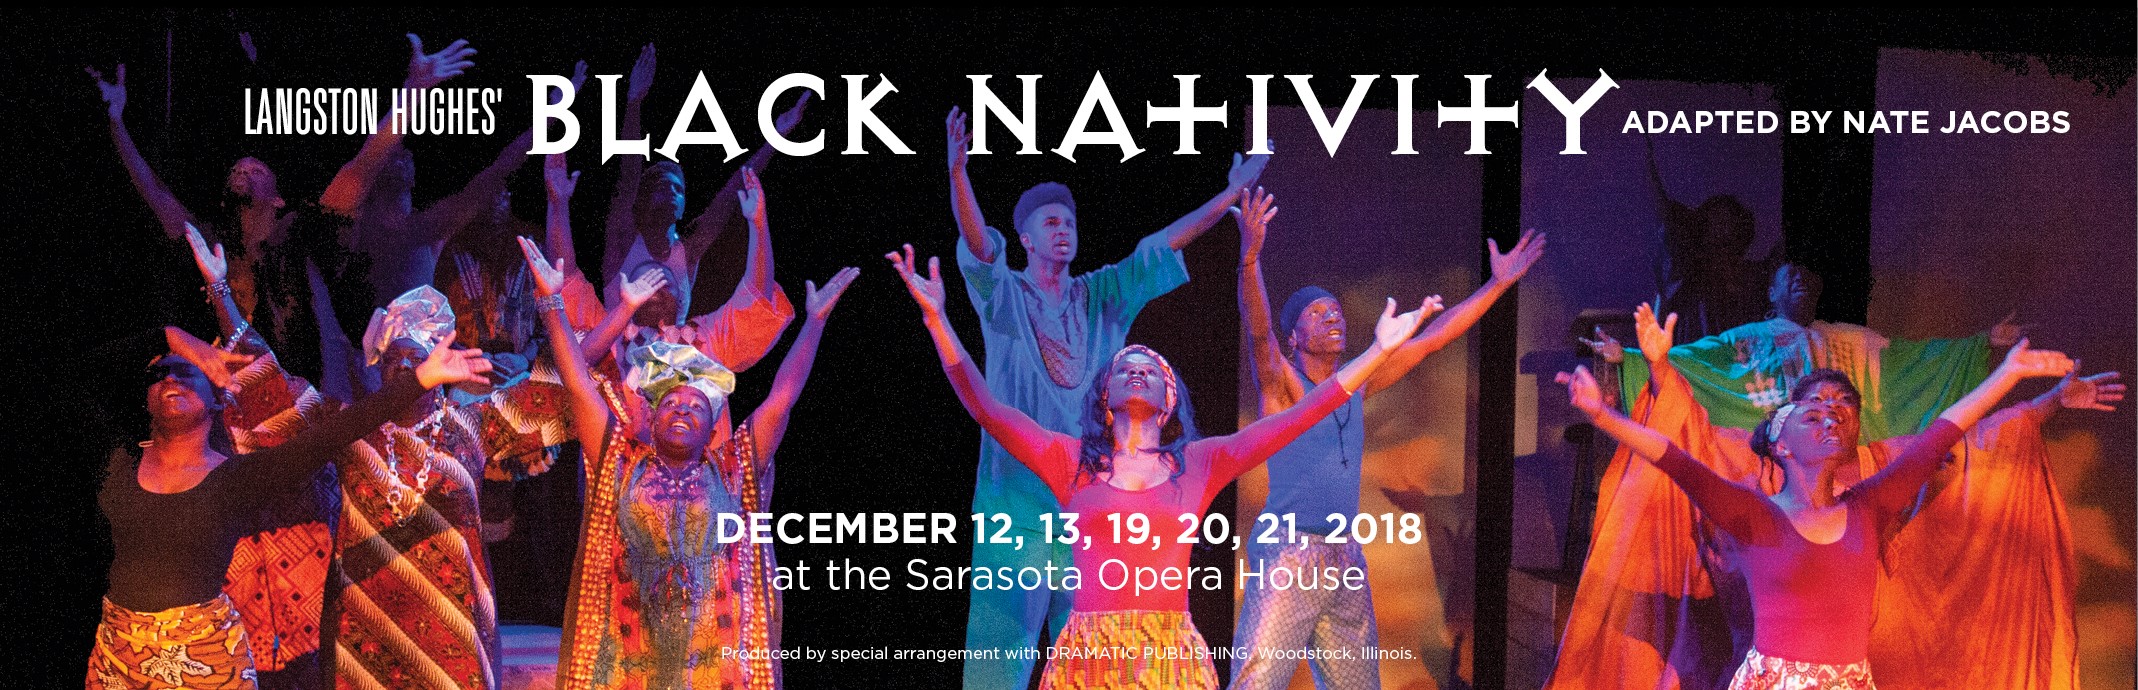 Langston Hughe's Black Nativity December 12, 13, 19. 20, 21, 2018 at the Sarasota Opera House; Produced by special arrangement with DRAMATIC PUBLISHING, Woodstock, Illinois